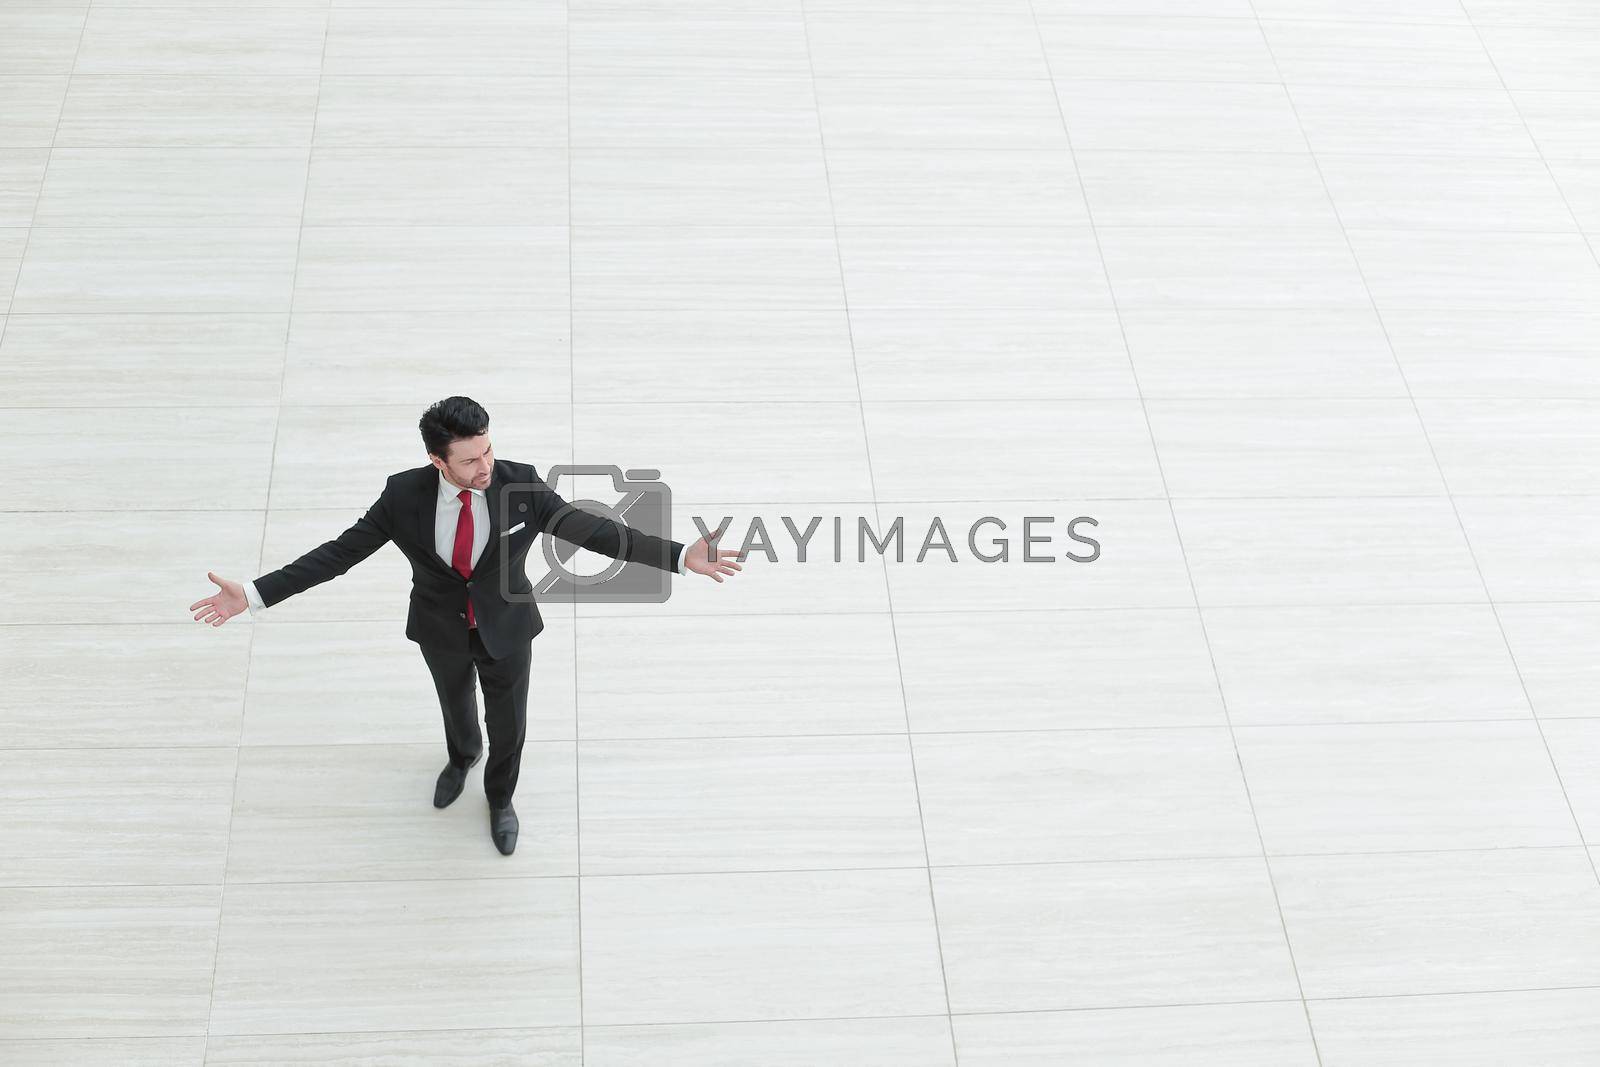 Royalty free image of top view from afar.Businessman spreads his hands to the sides by asdf